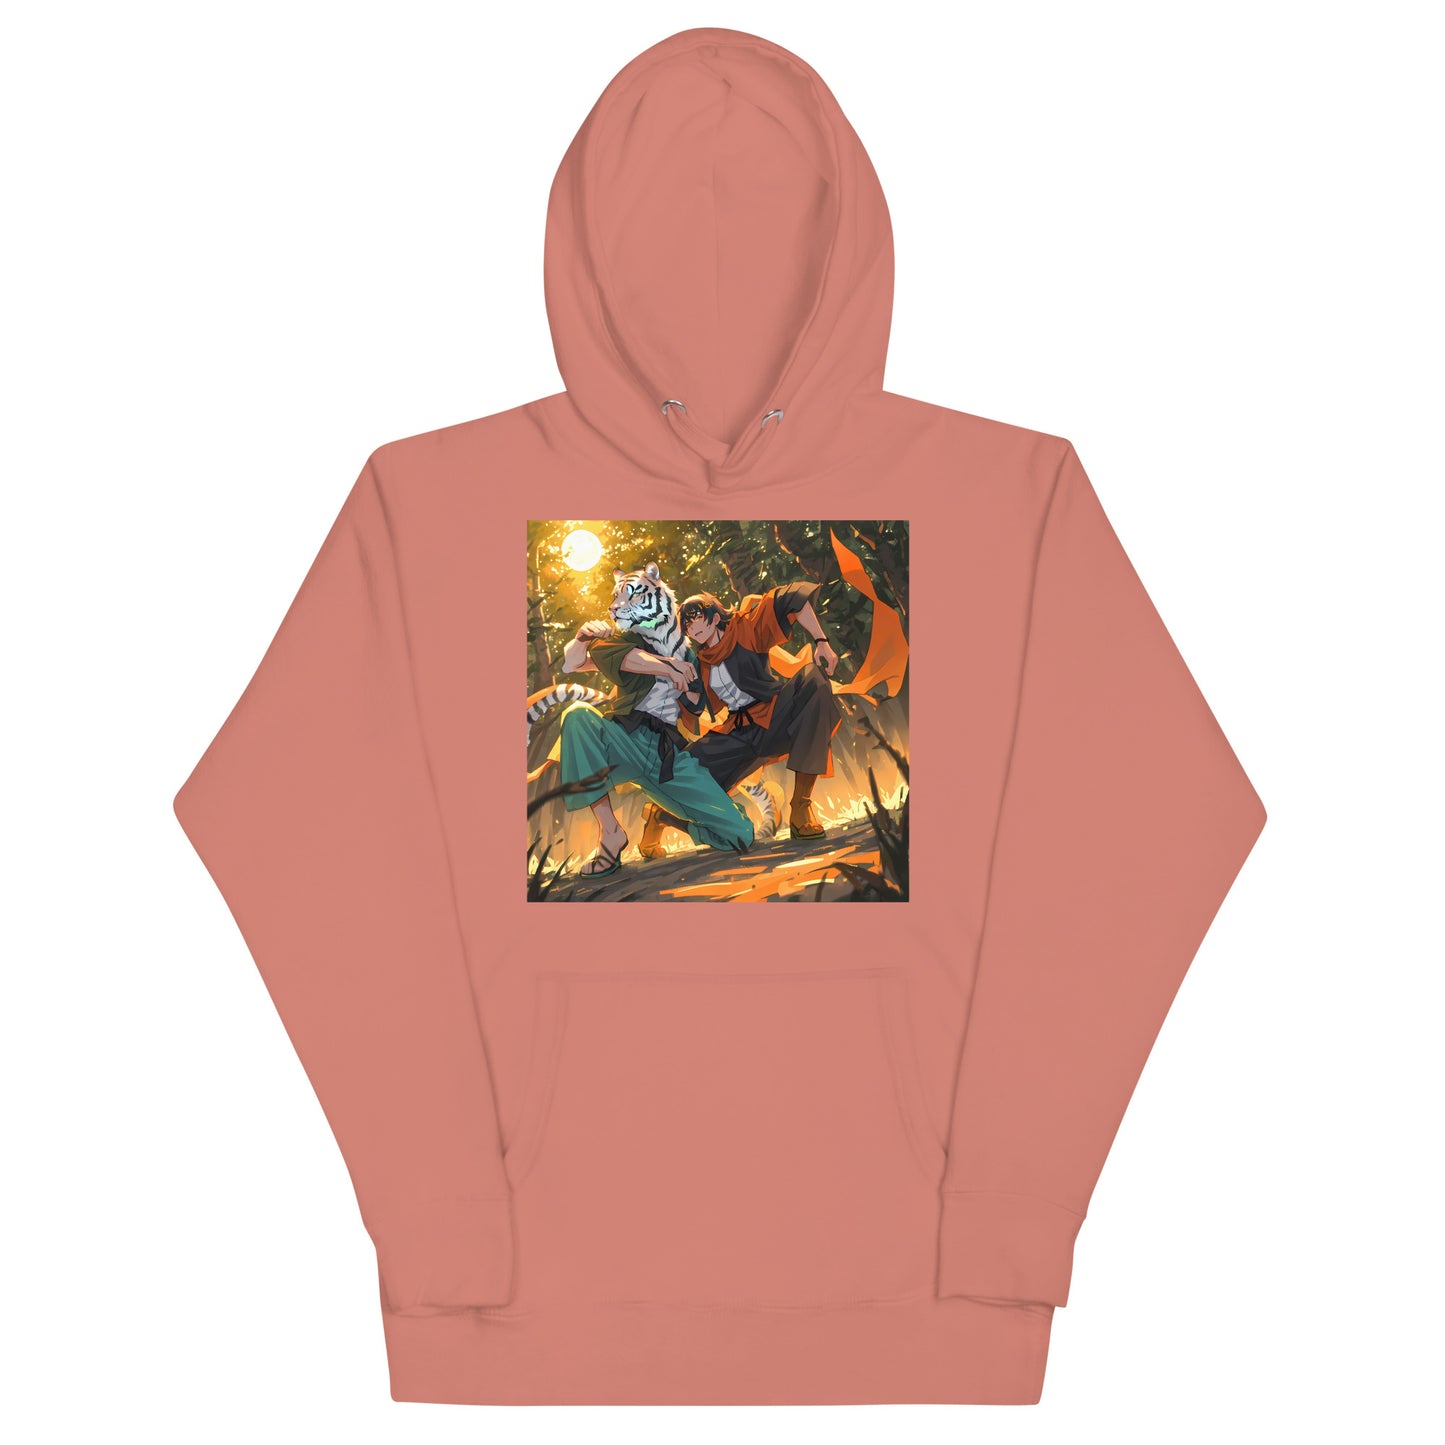 Unisex Anime Friends in the Forest Hoodie